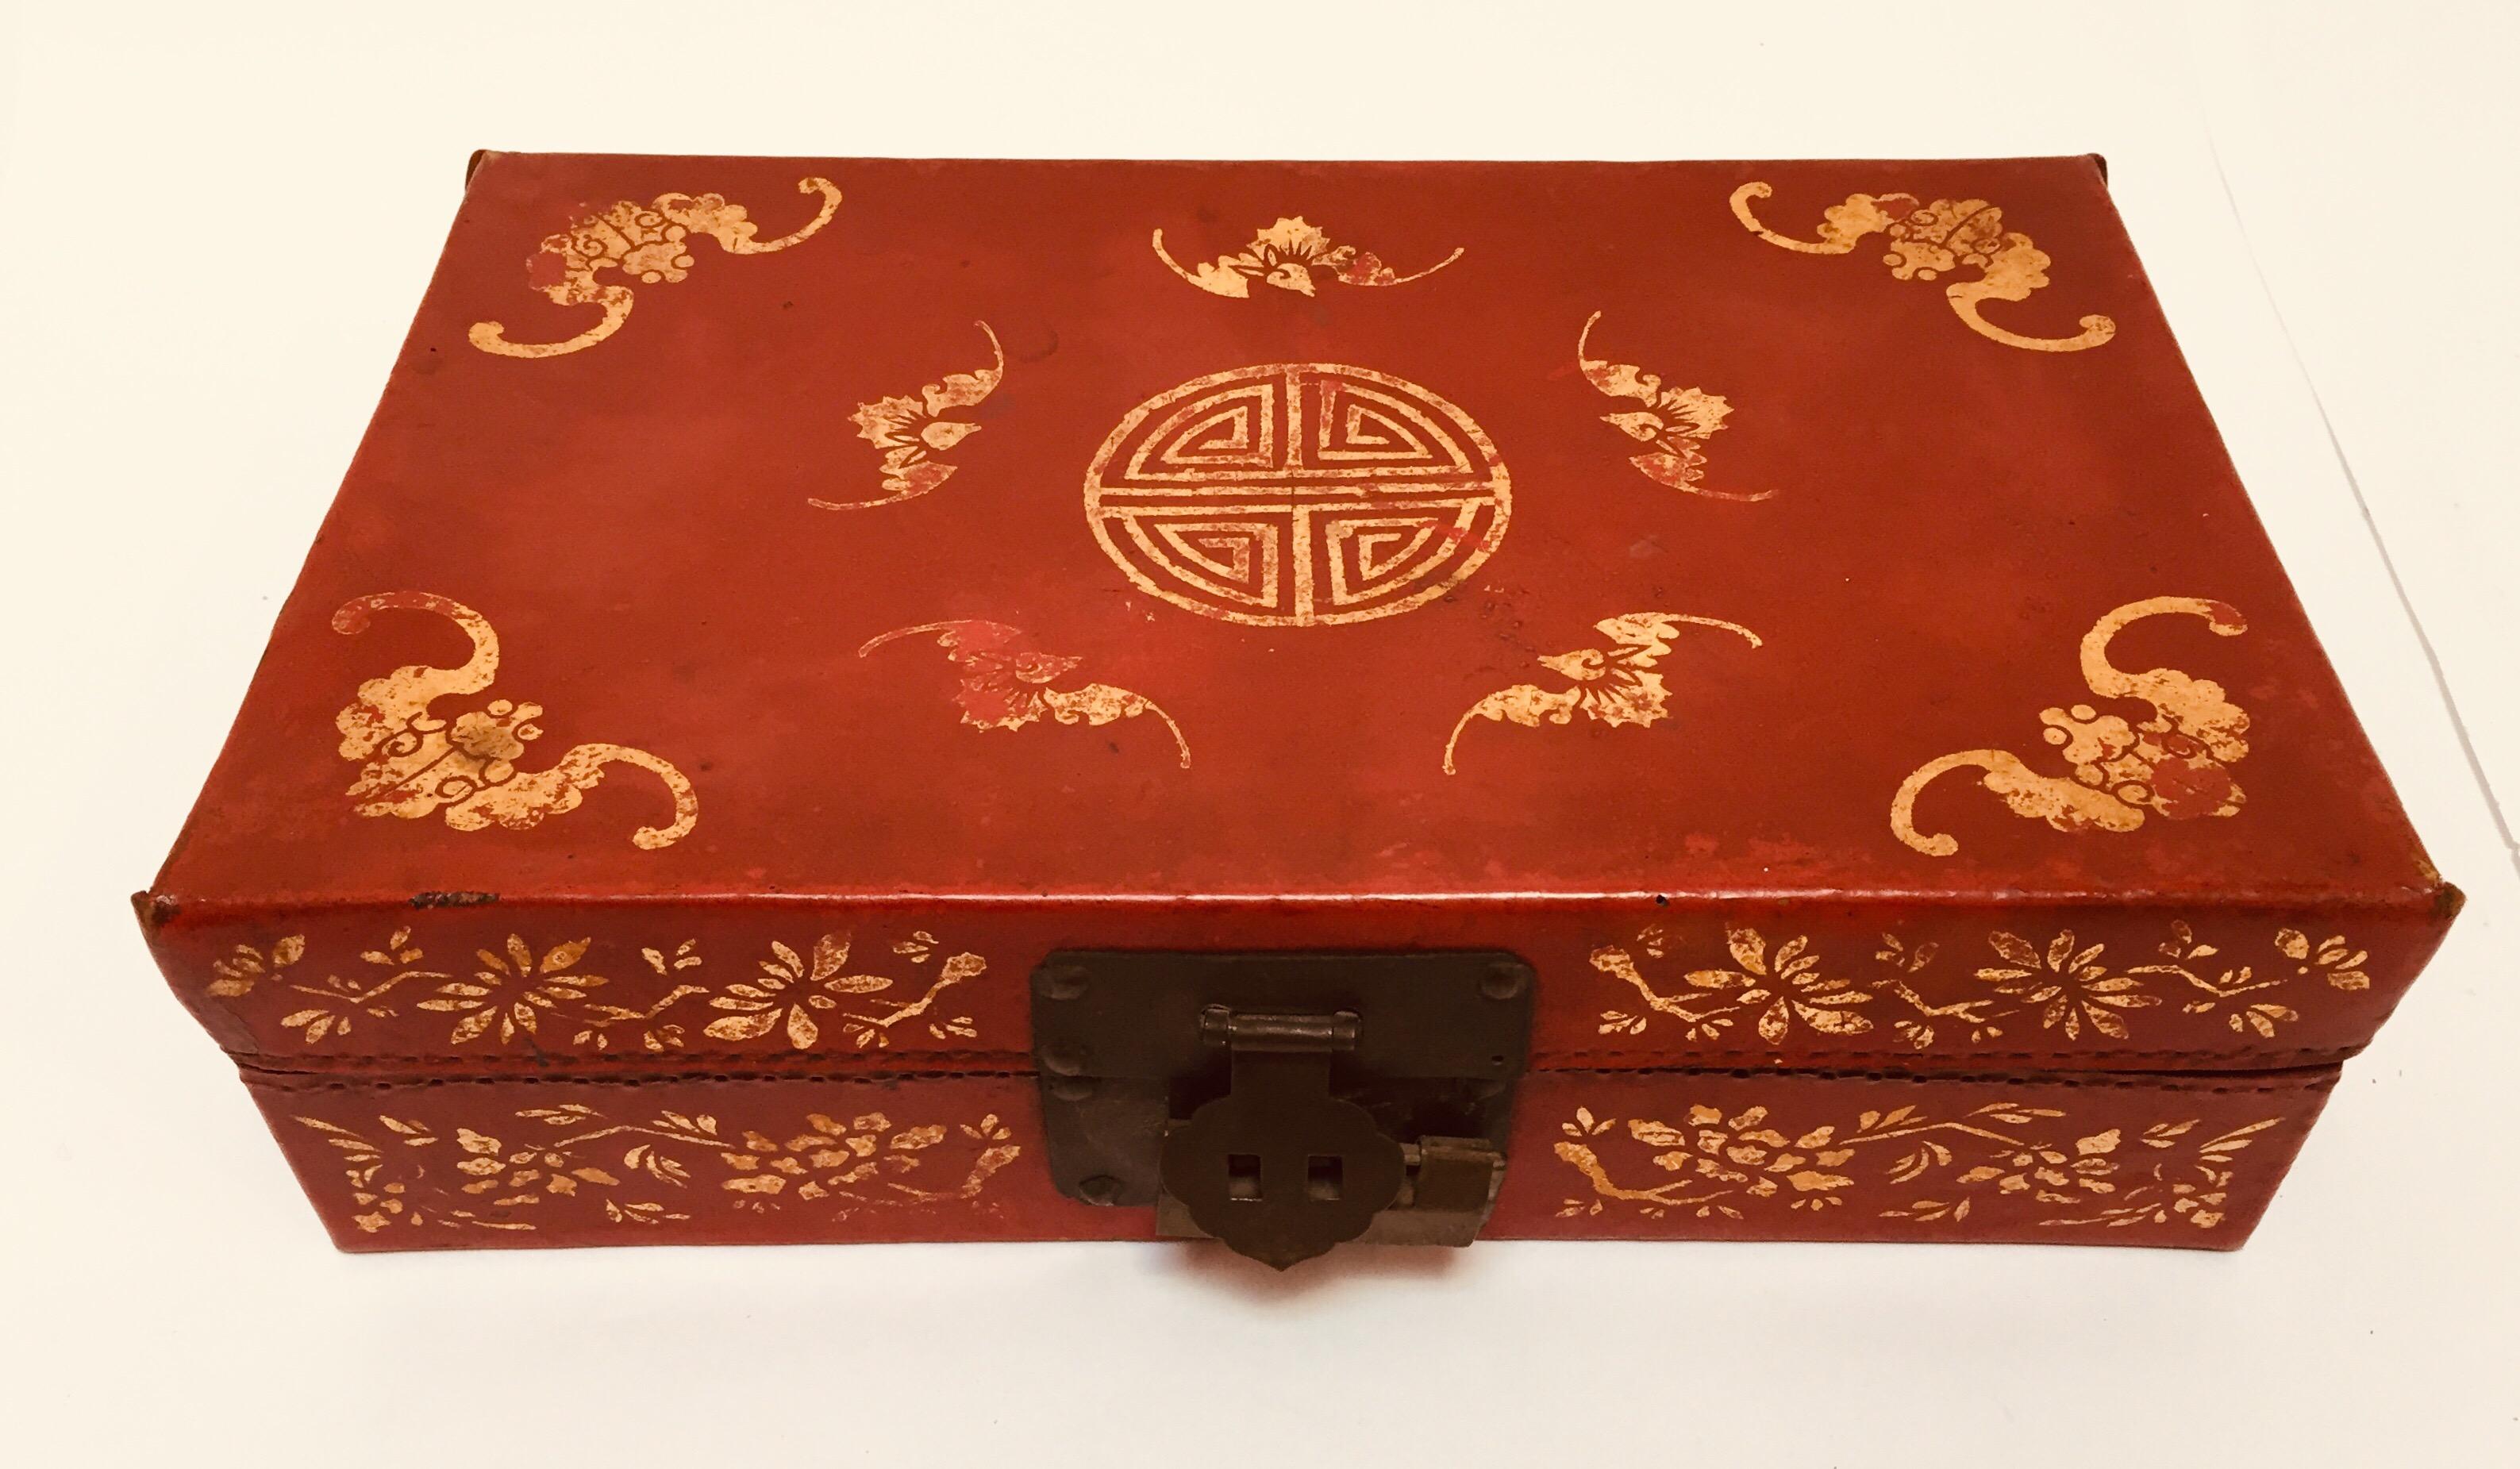 Chinoiserie red leather gilt hand painted oriental traveling box.
This box is in good condition with beautiful crackled appearance in the back where the box open.
Wonderful Chinese box in red, gold painted floral and Chinese writing design on